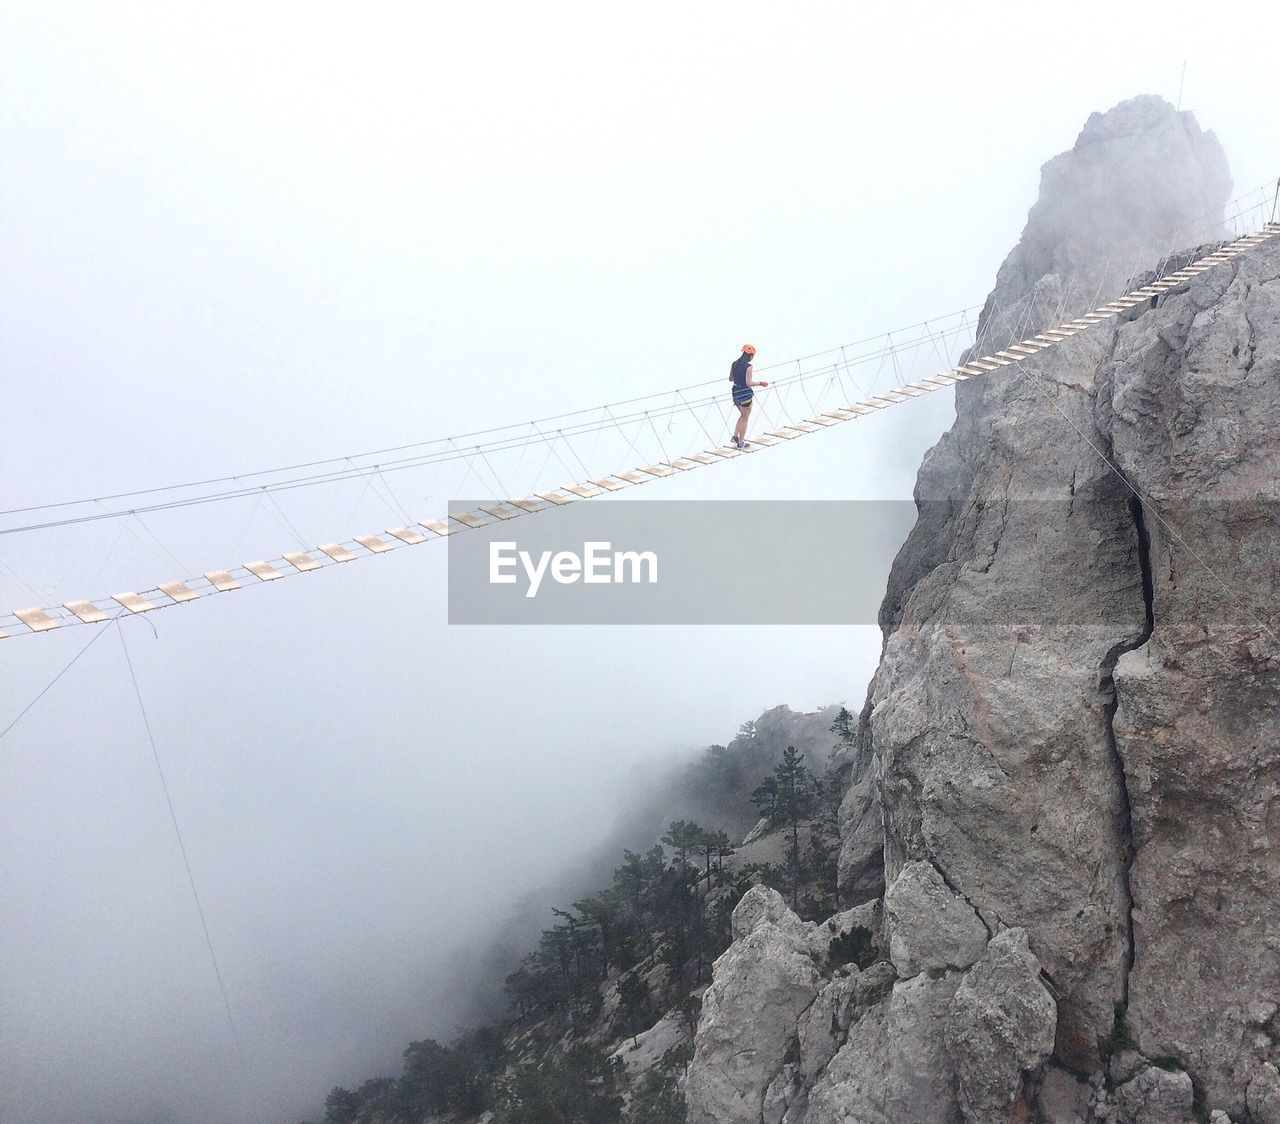 Woman on rope bridge during foggy weather